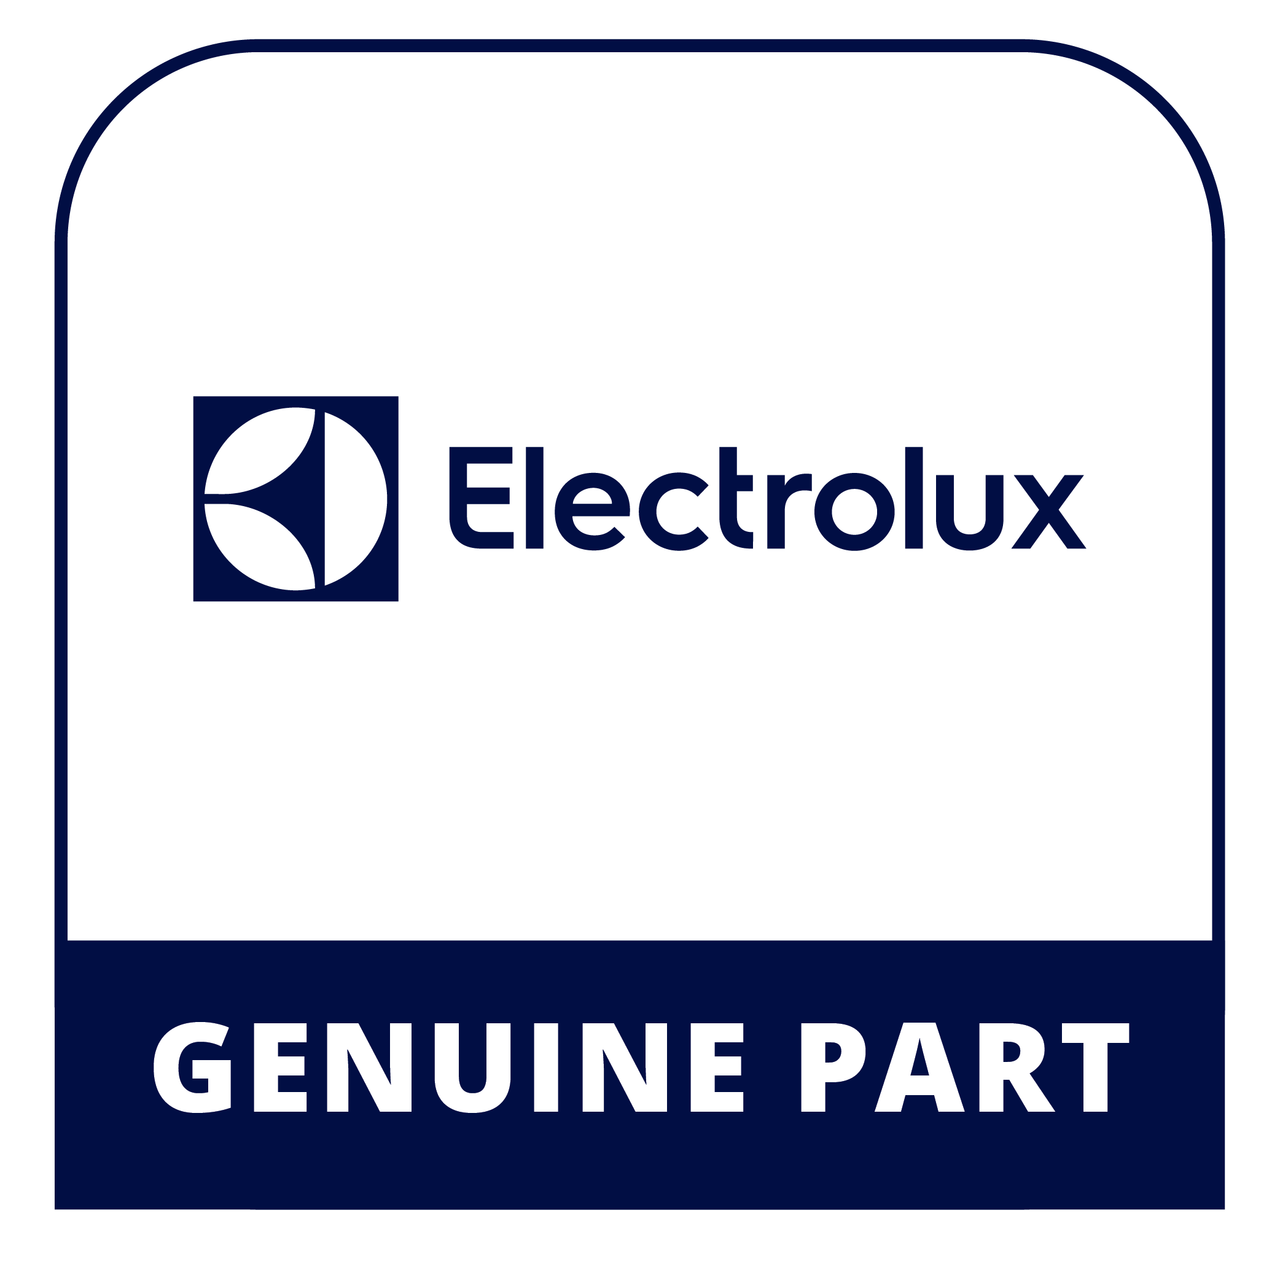 Frigidaire - Electrolux 316544102 Owners Manual - Genuine Electrolux Part